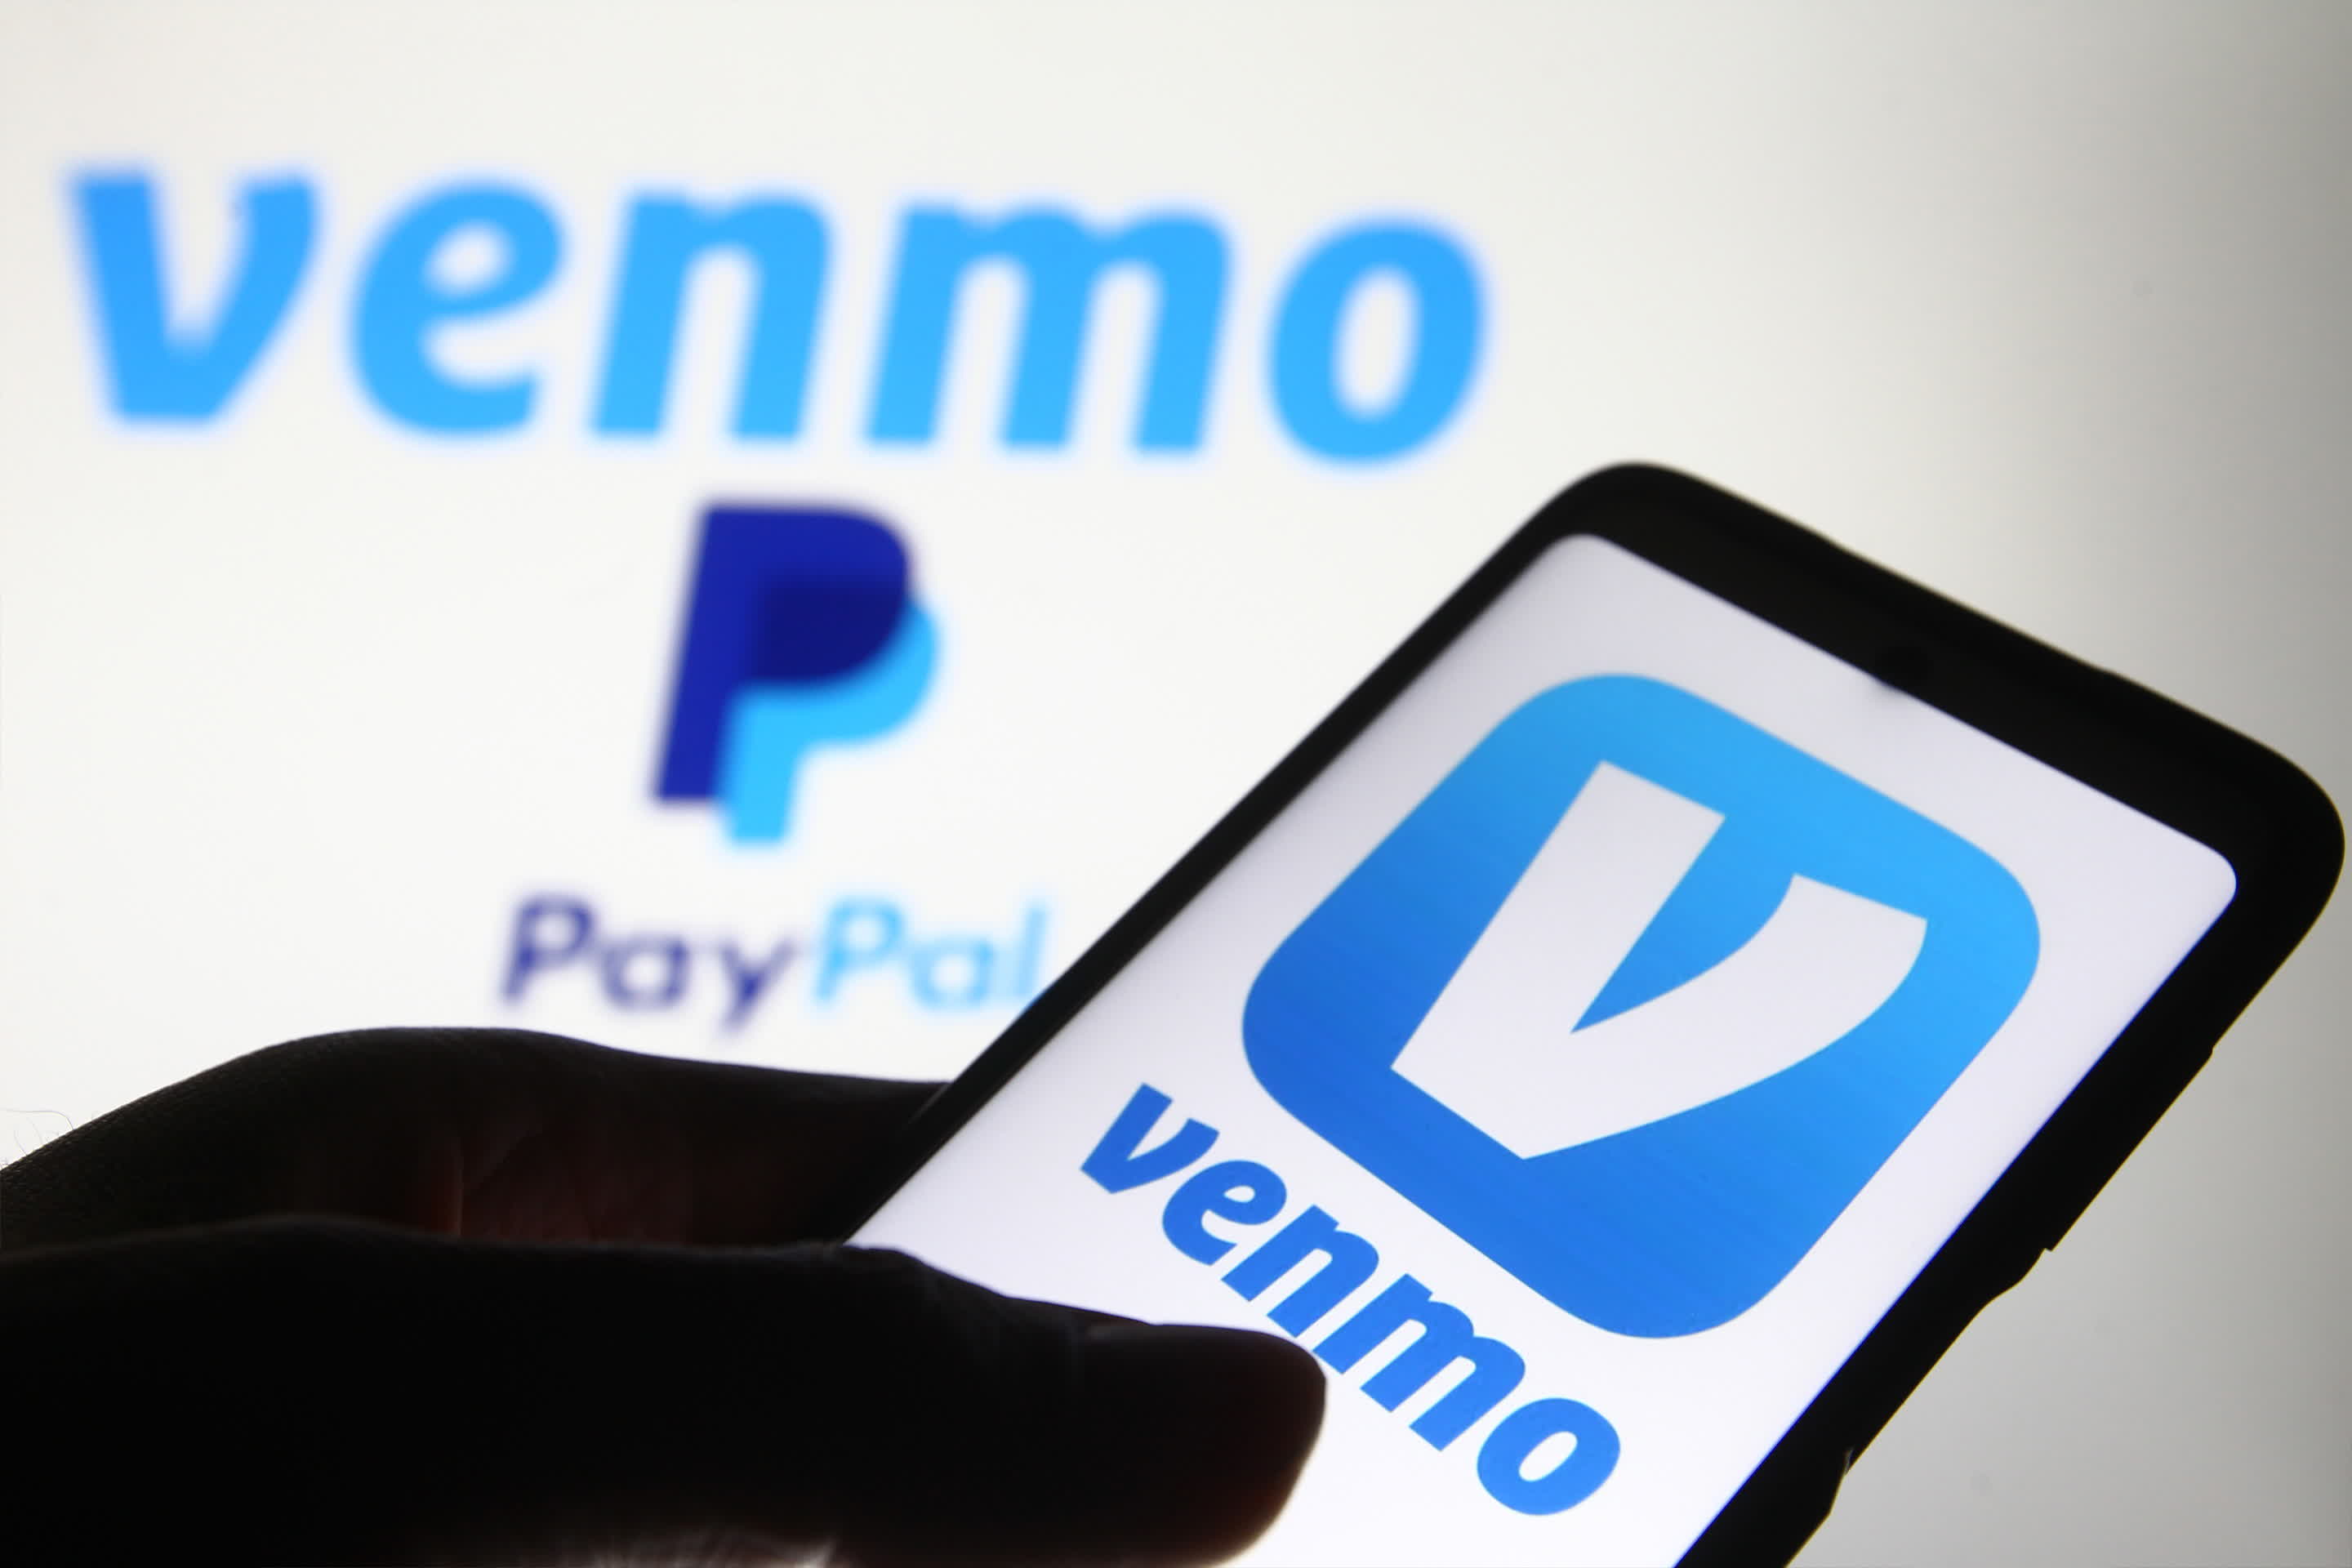 PayPal, Venmo and other payment platforms don't provide insurance coverage, US government warns